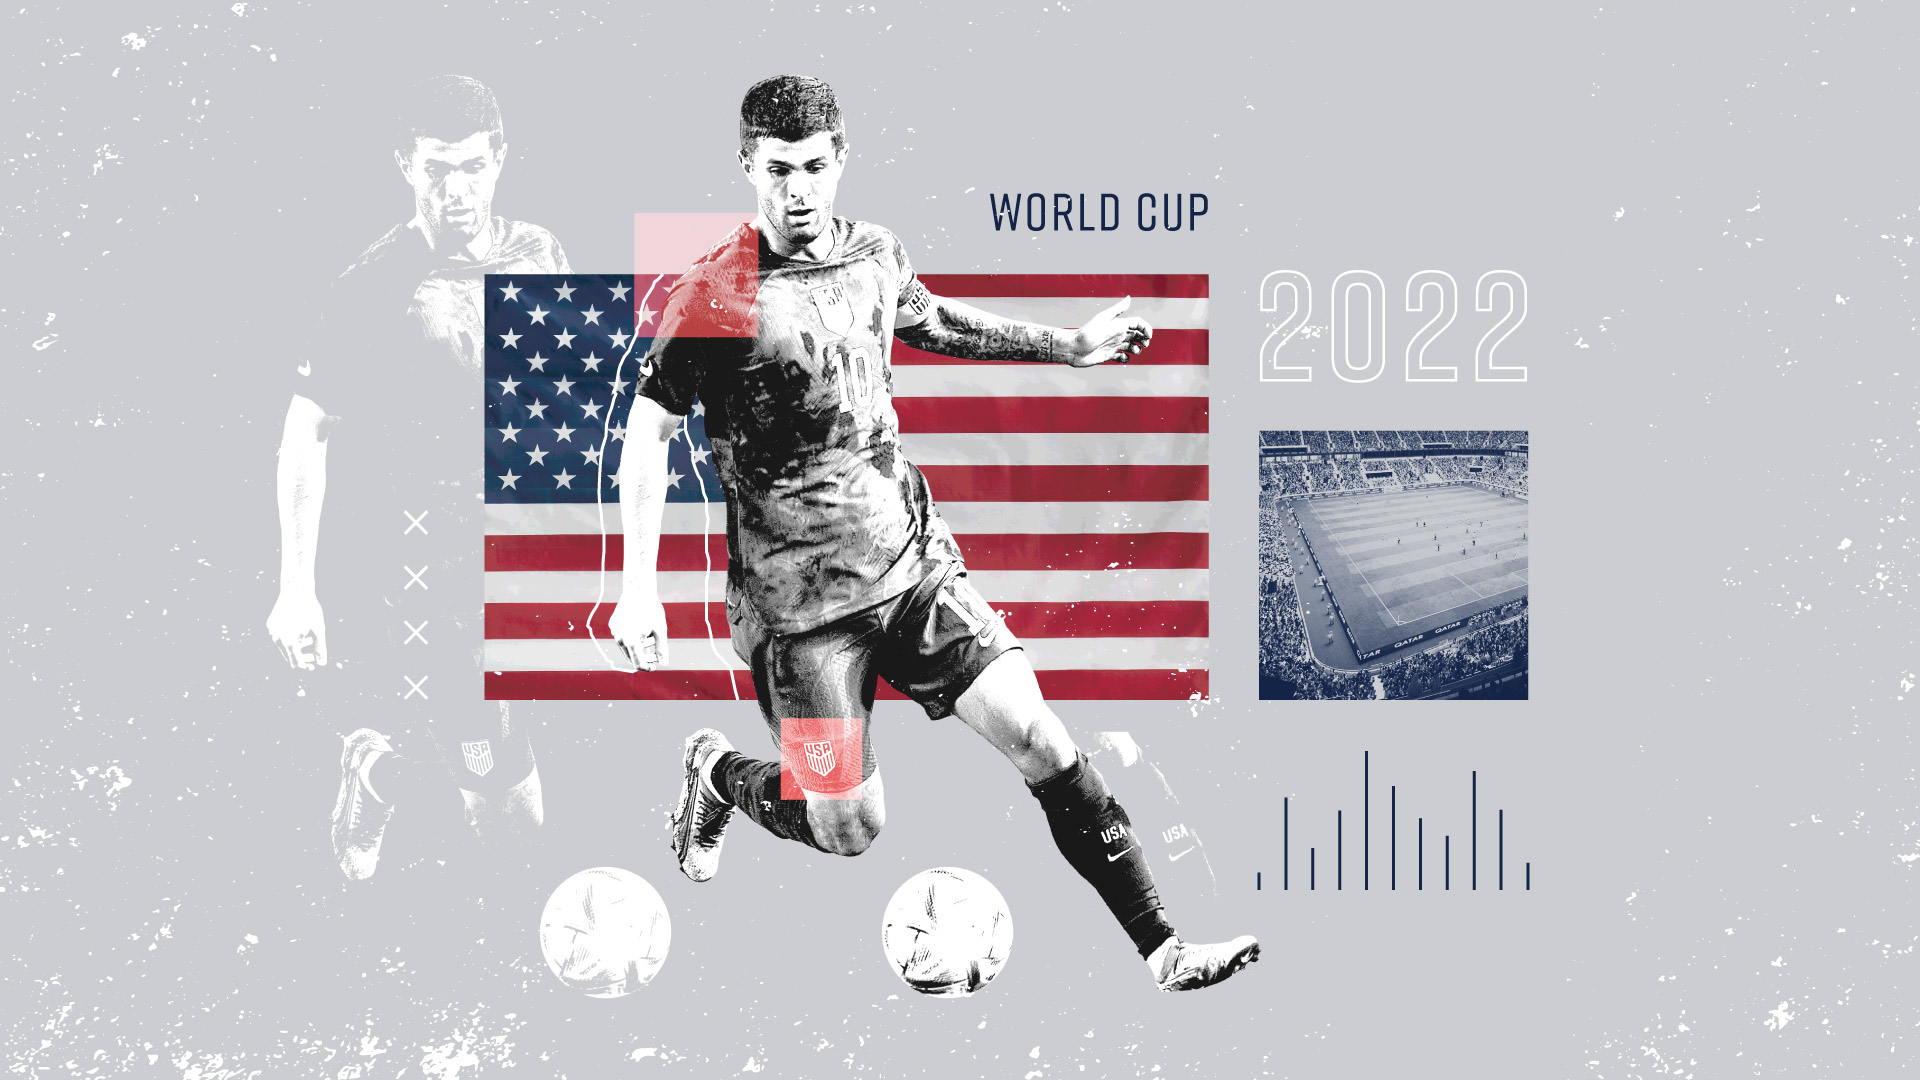 Graphic including an image of Christian Pulisic from the U.S. men's national team ahead of the World Cup